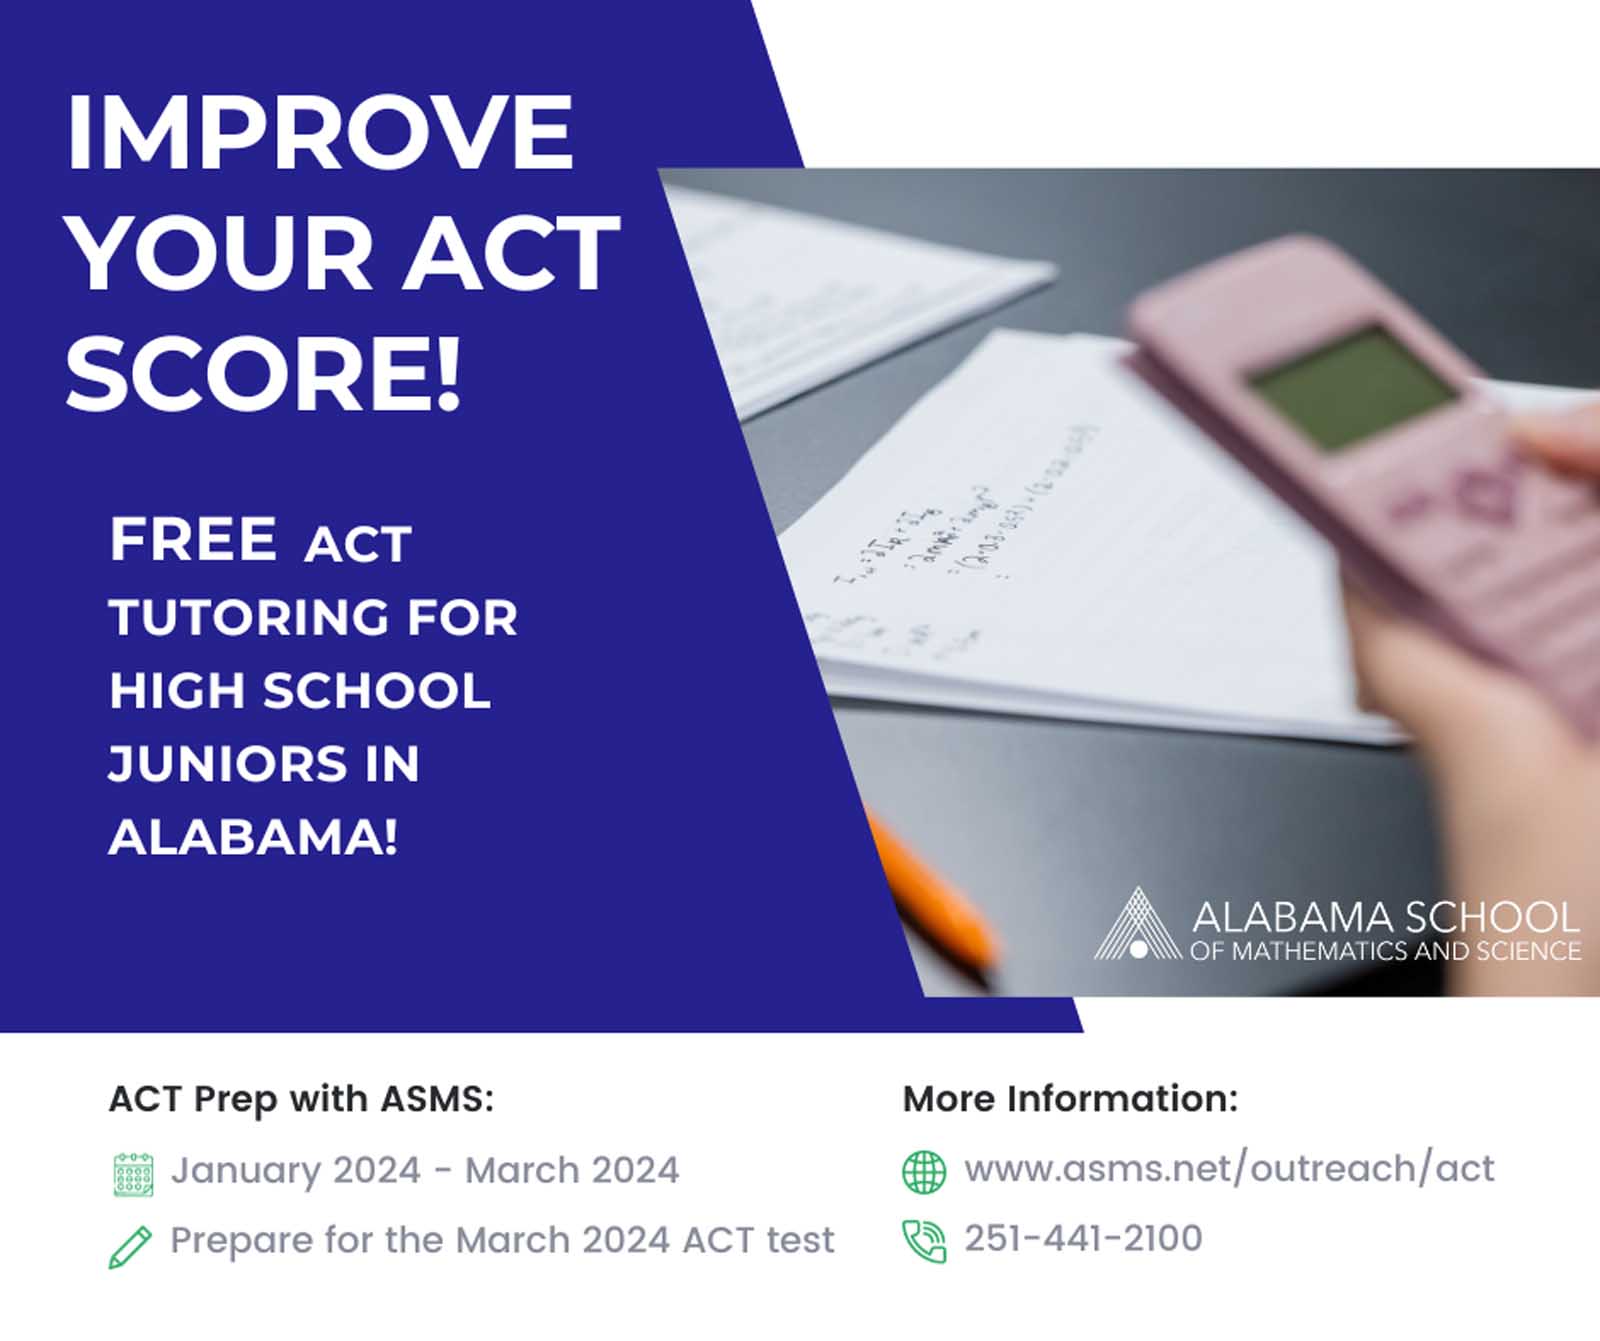 ASMS Offering Free ACT Prep